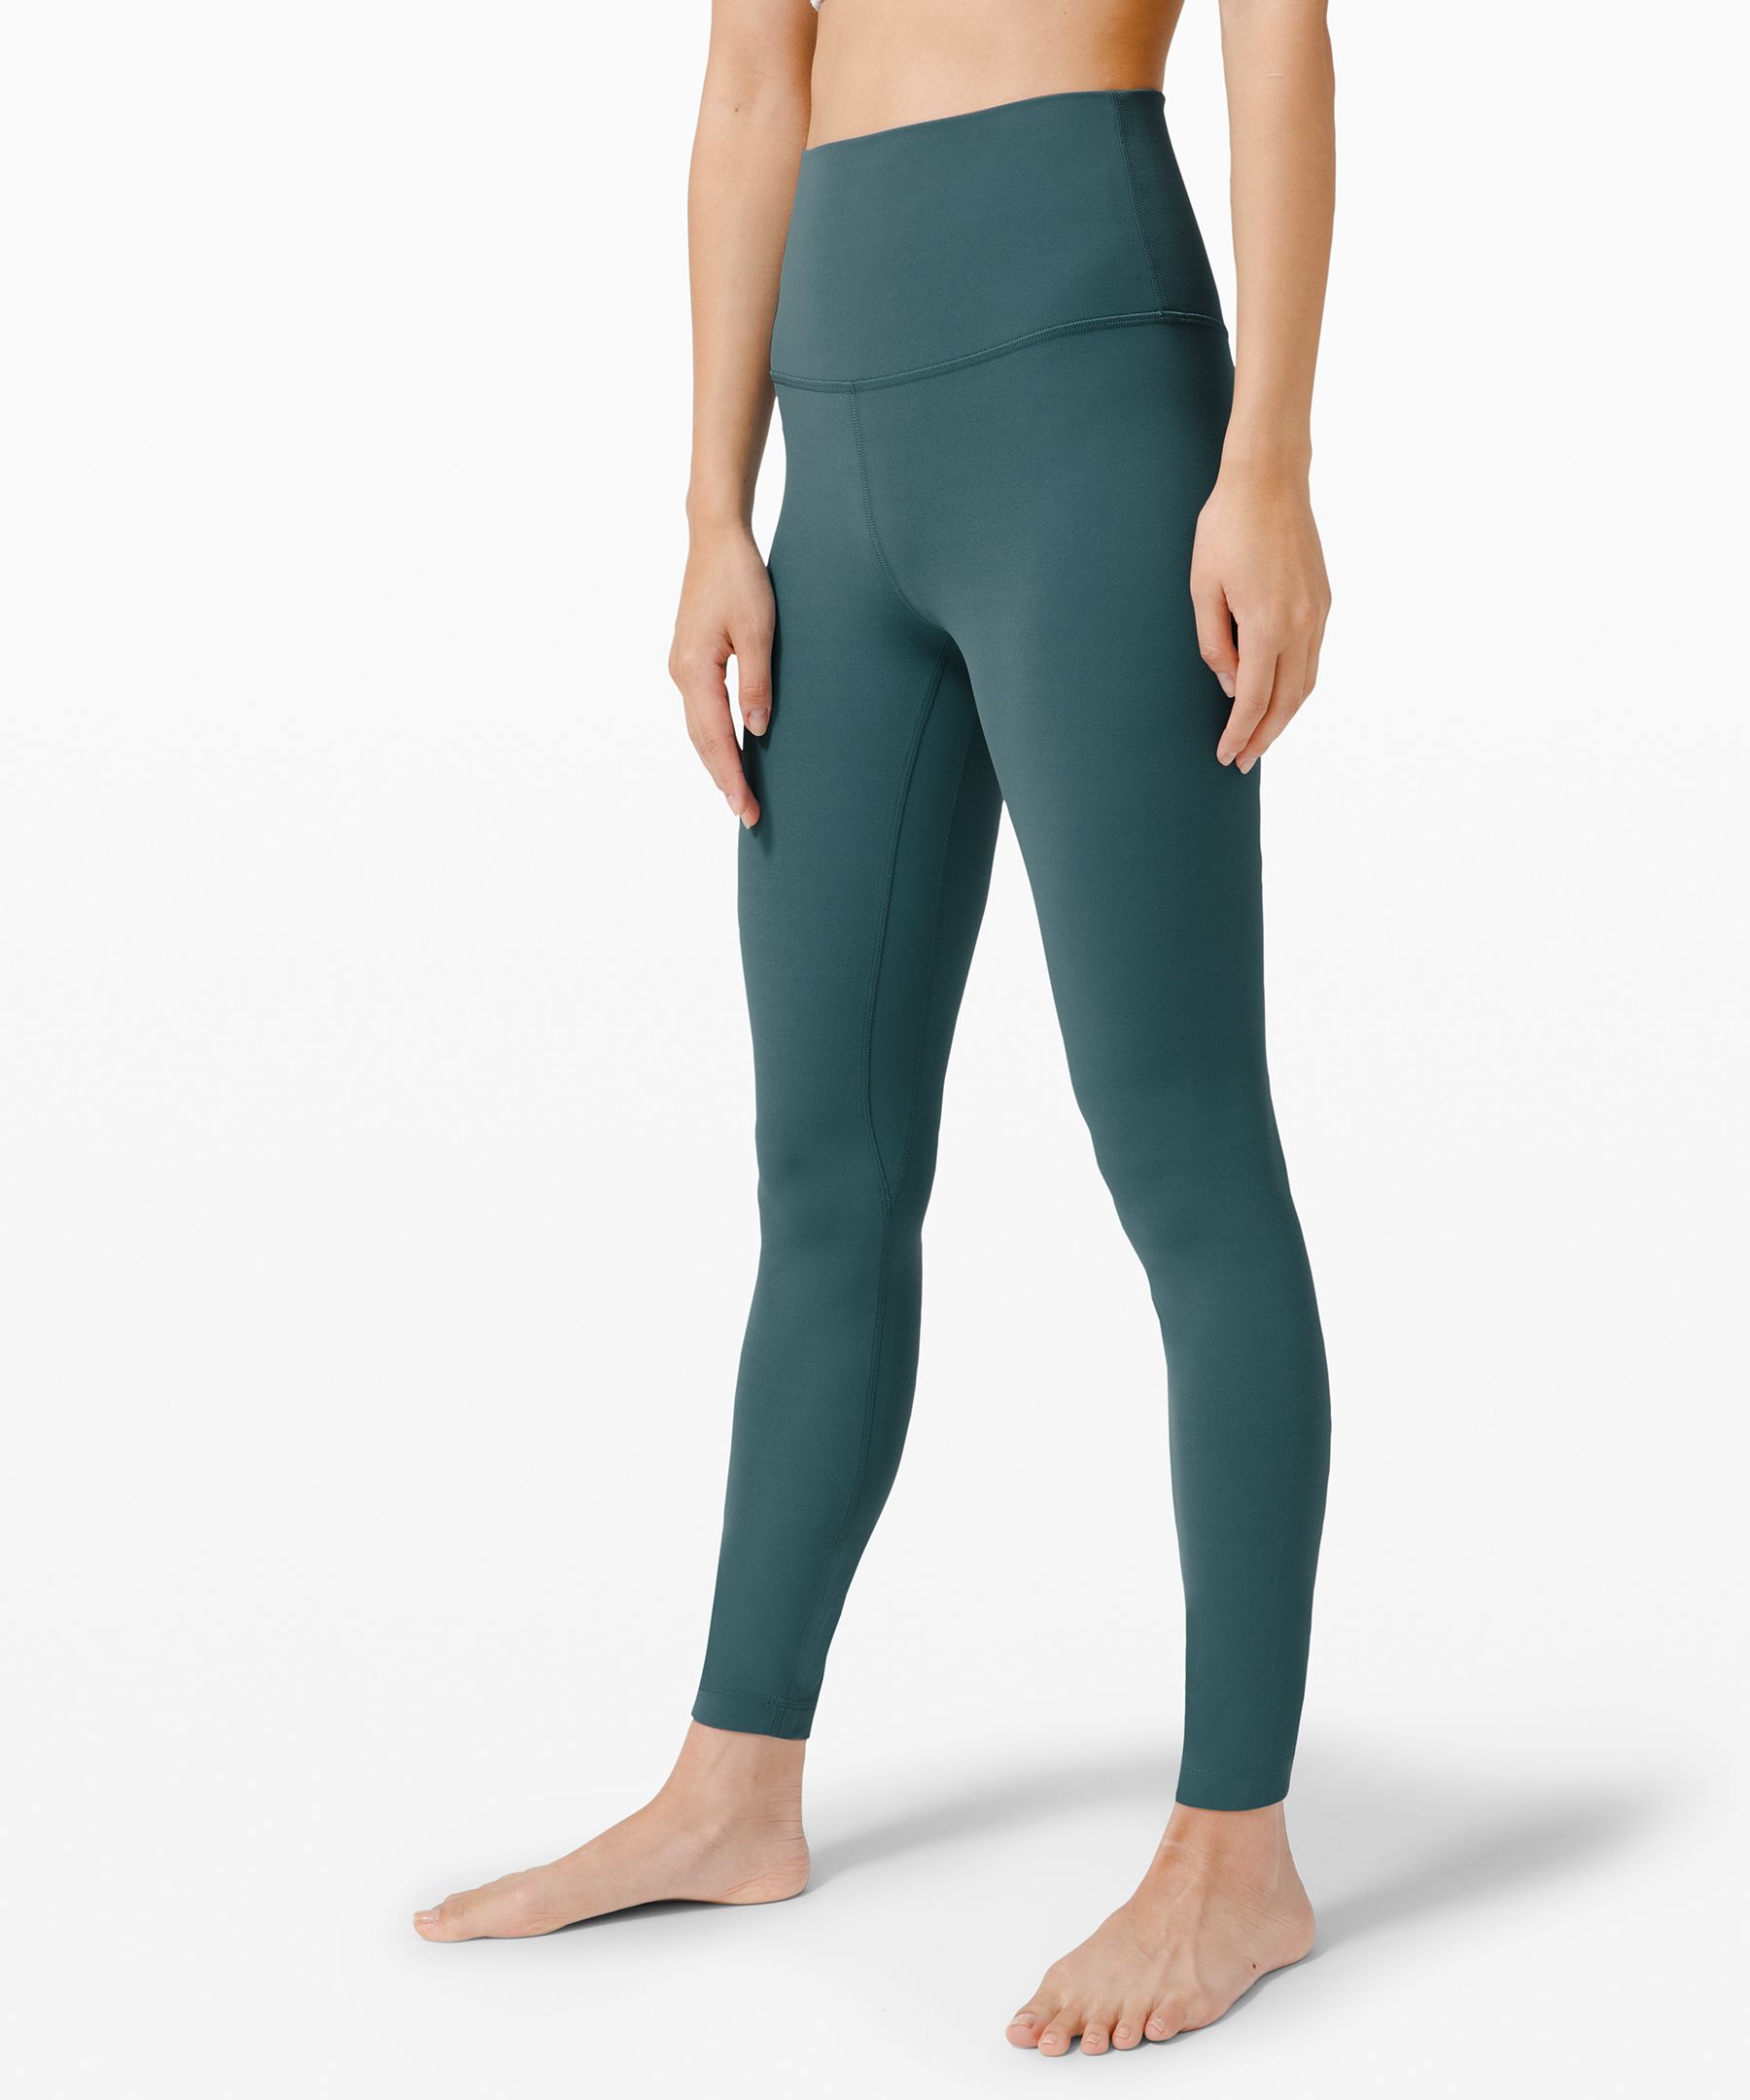 These Lululemon pants are perfect for 'mom life' — and they're